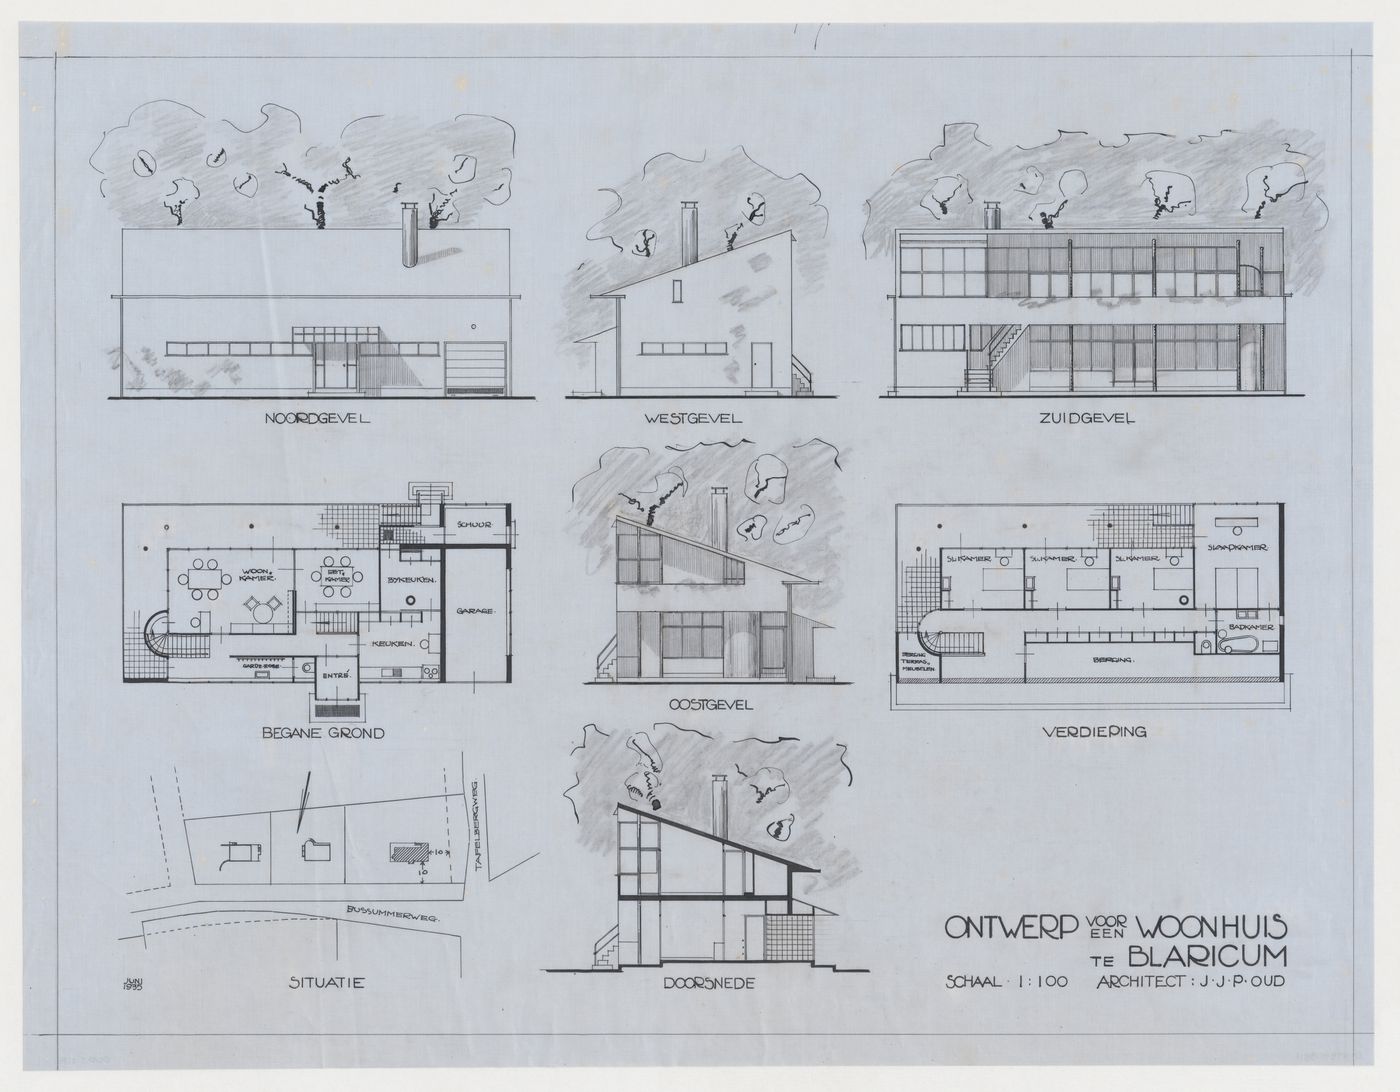 Site plan, plans, elevations, and section for Pfeffer-De Leeuw country house, Blaricum, Netherlands